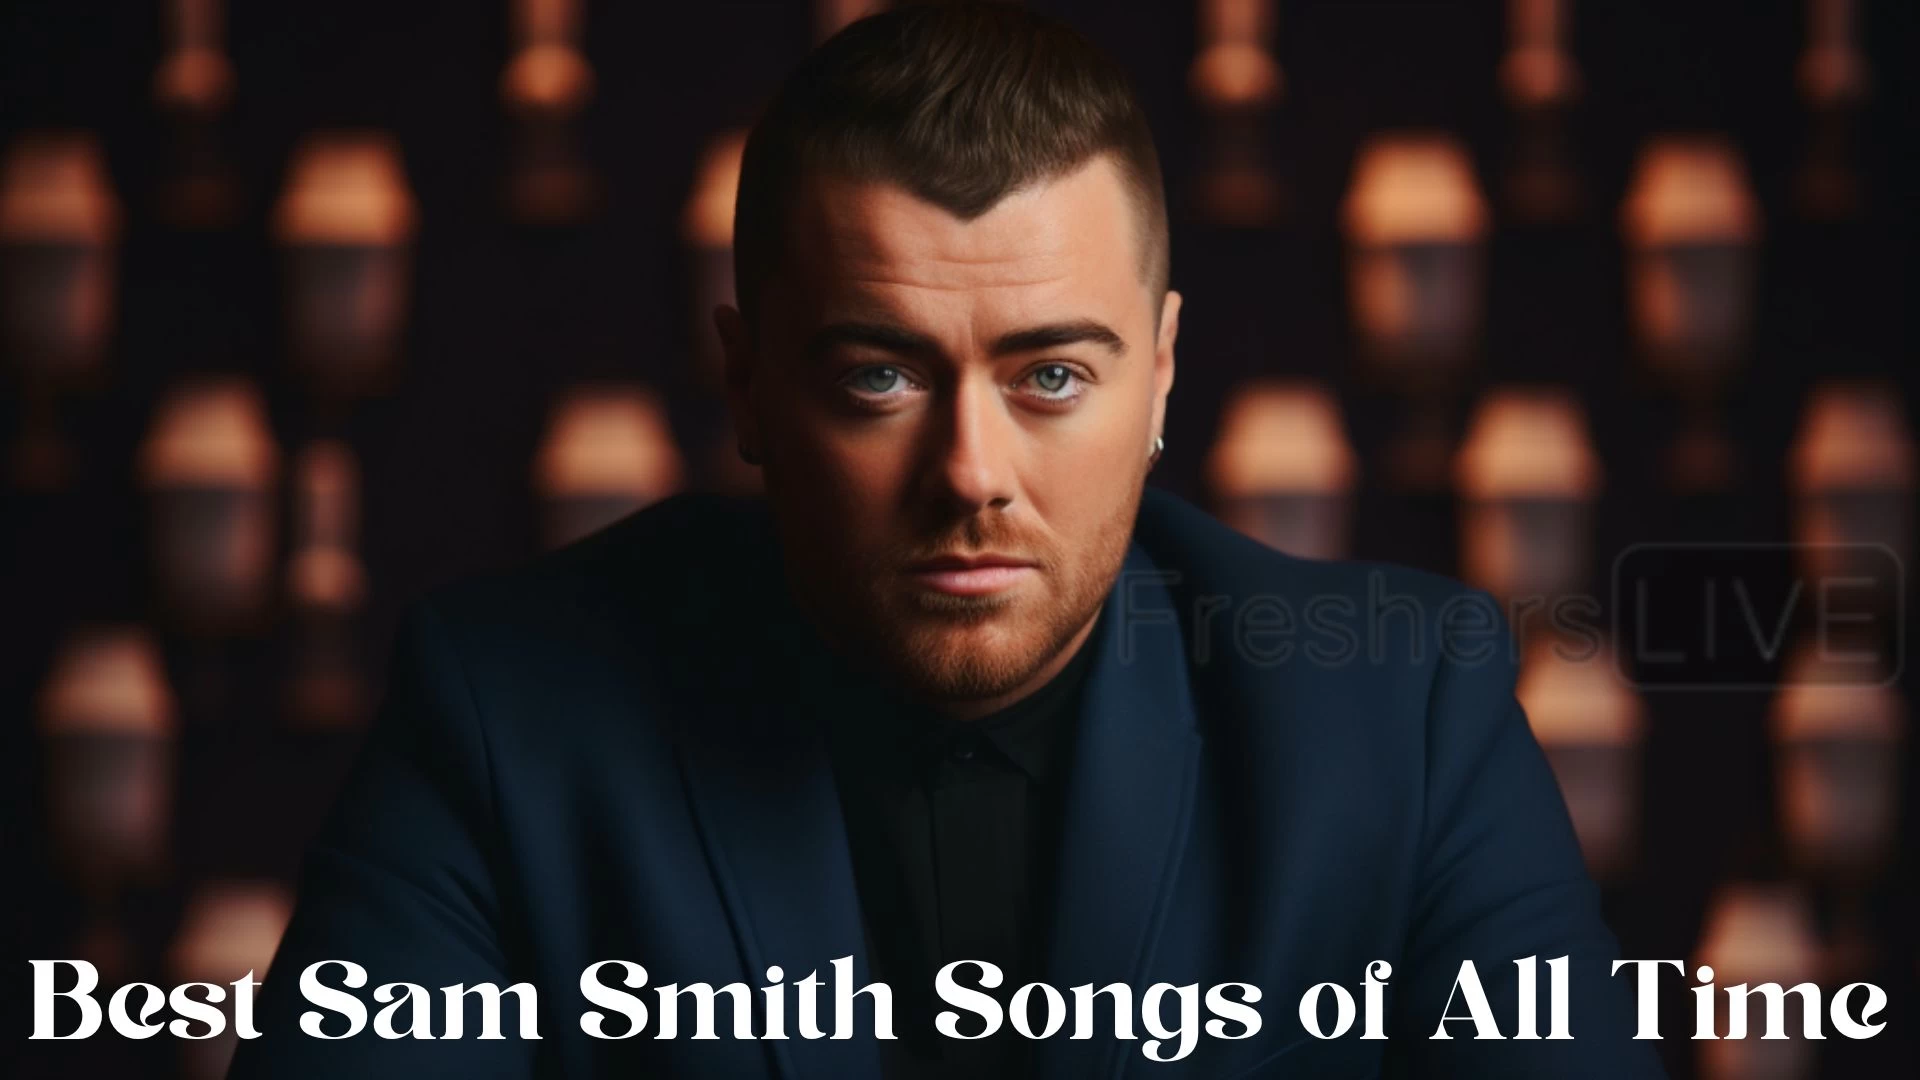 Best Sam Smith Songs of All Time - Top 10 Musical Brilliance